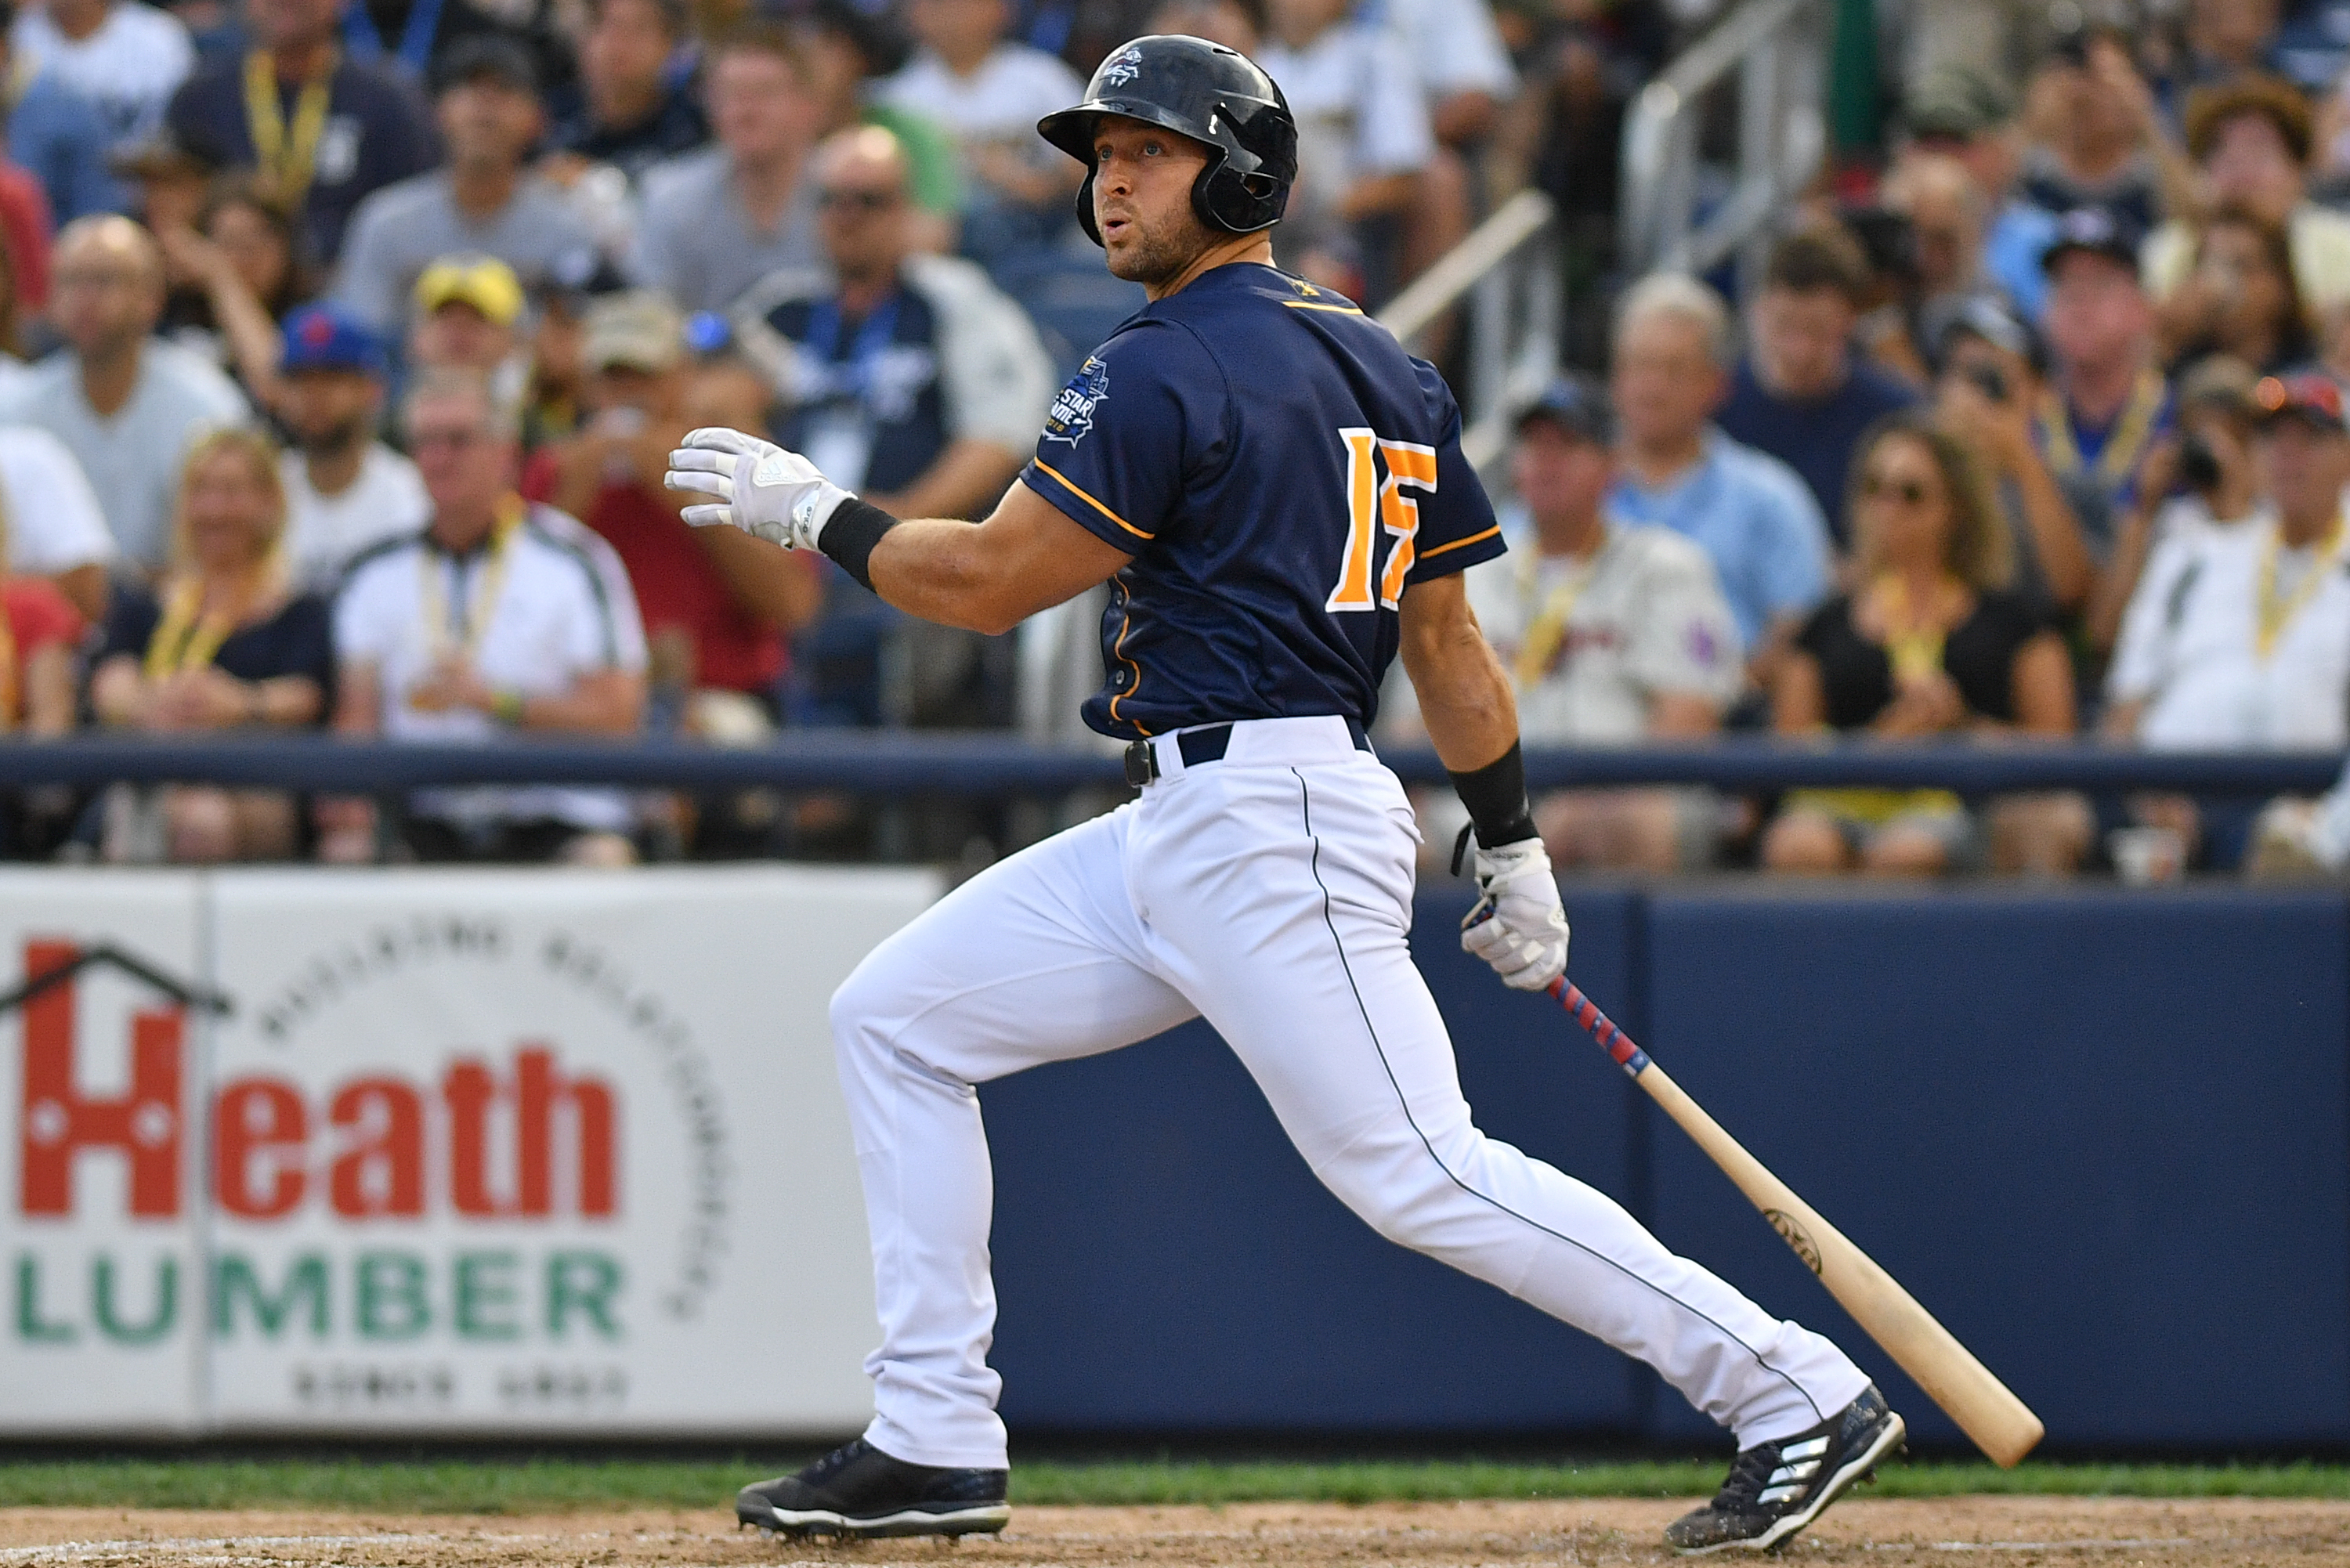 Tim Tebow stats: How he's doing in Double-A baseball at Binghamton